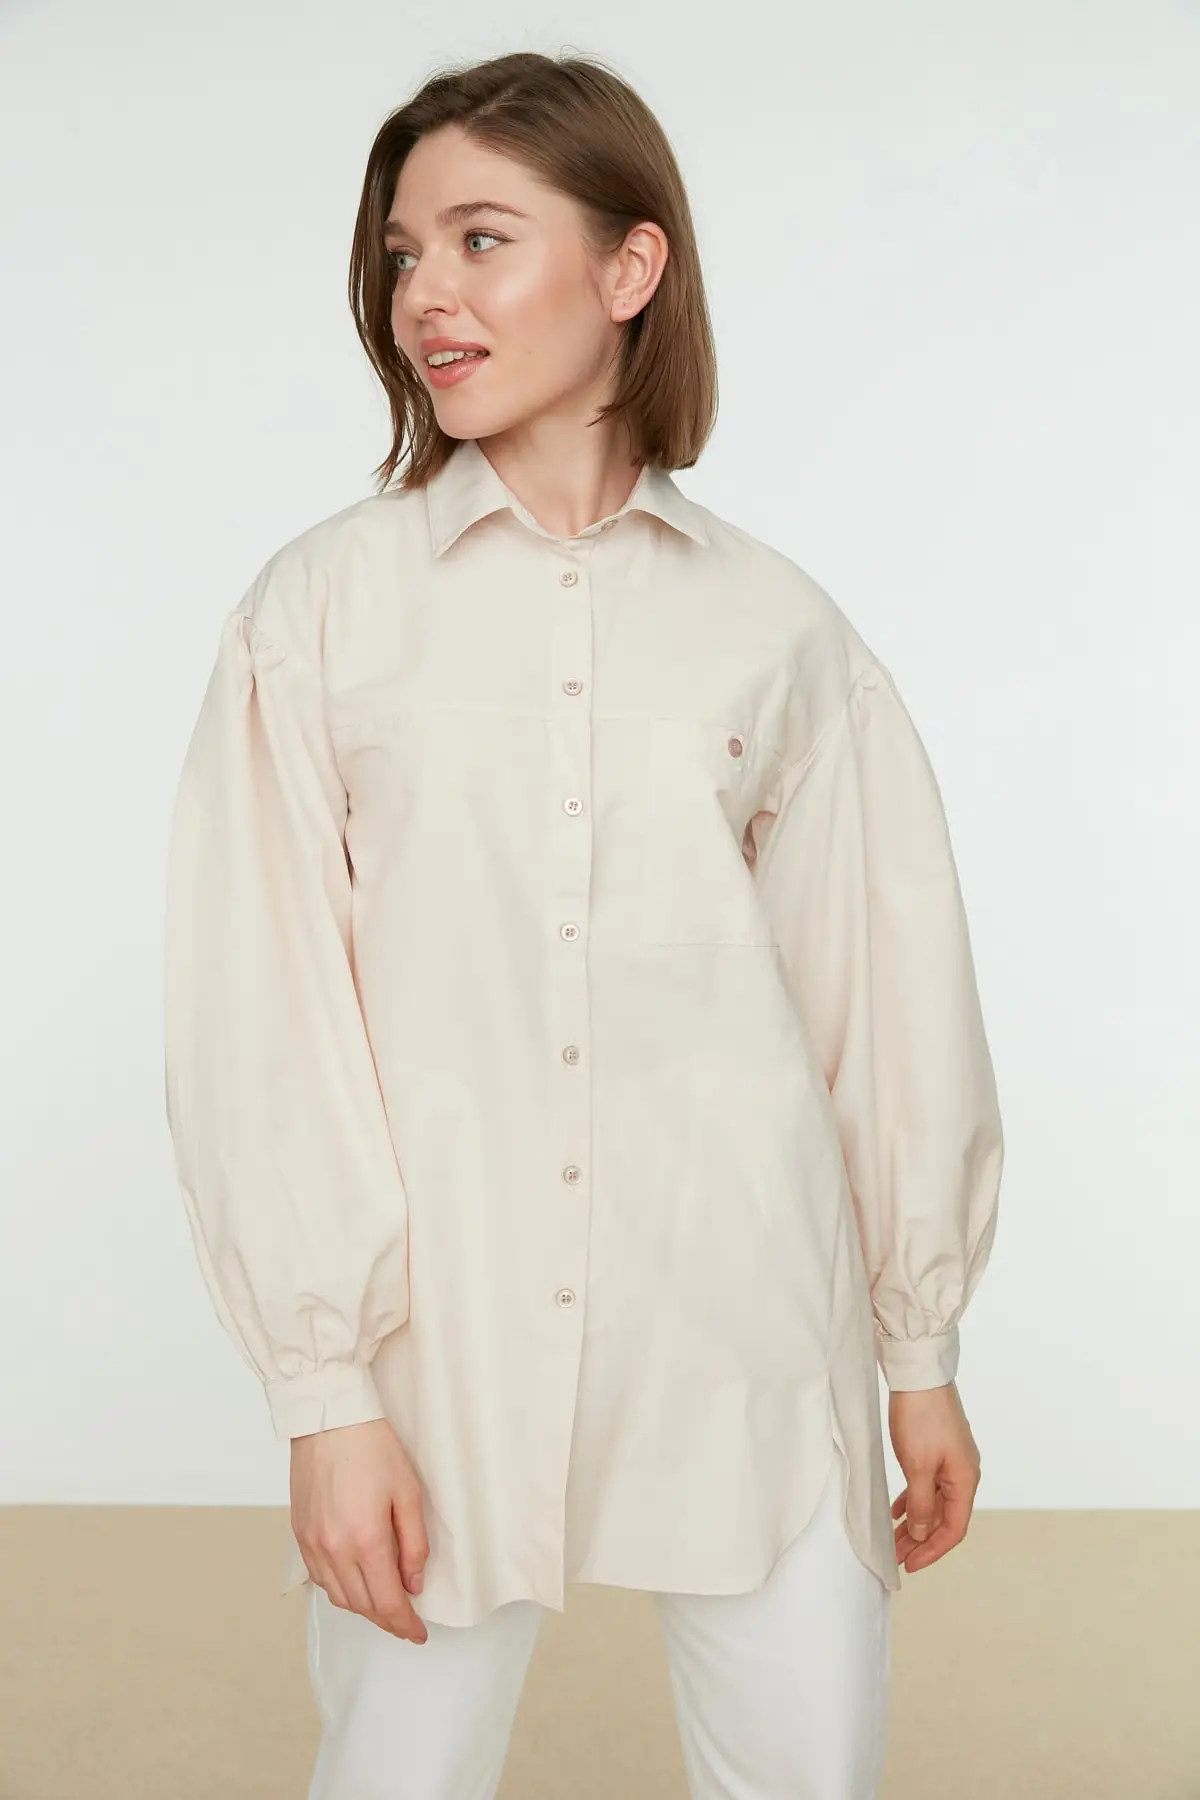 Stone Balloon Sleeve Back Long Pocket Detail Basic Woven Shirt TCTSS21GO0976 Additional Feature Available Don 'T Single Flat Casual Collar